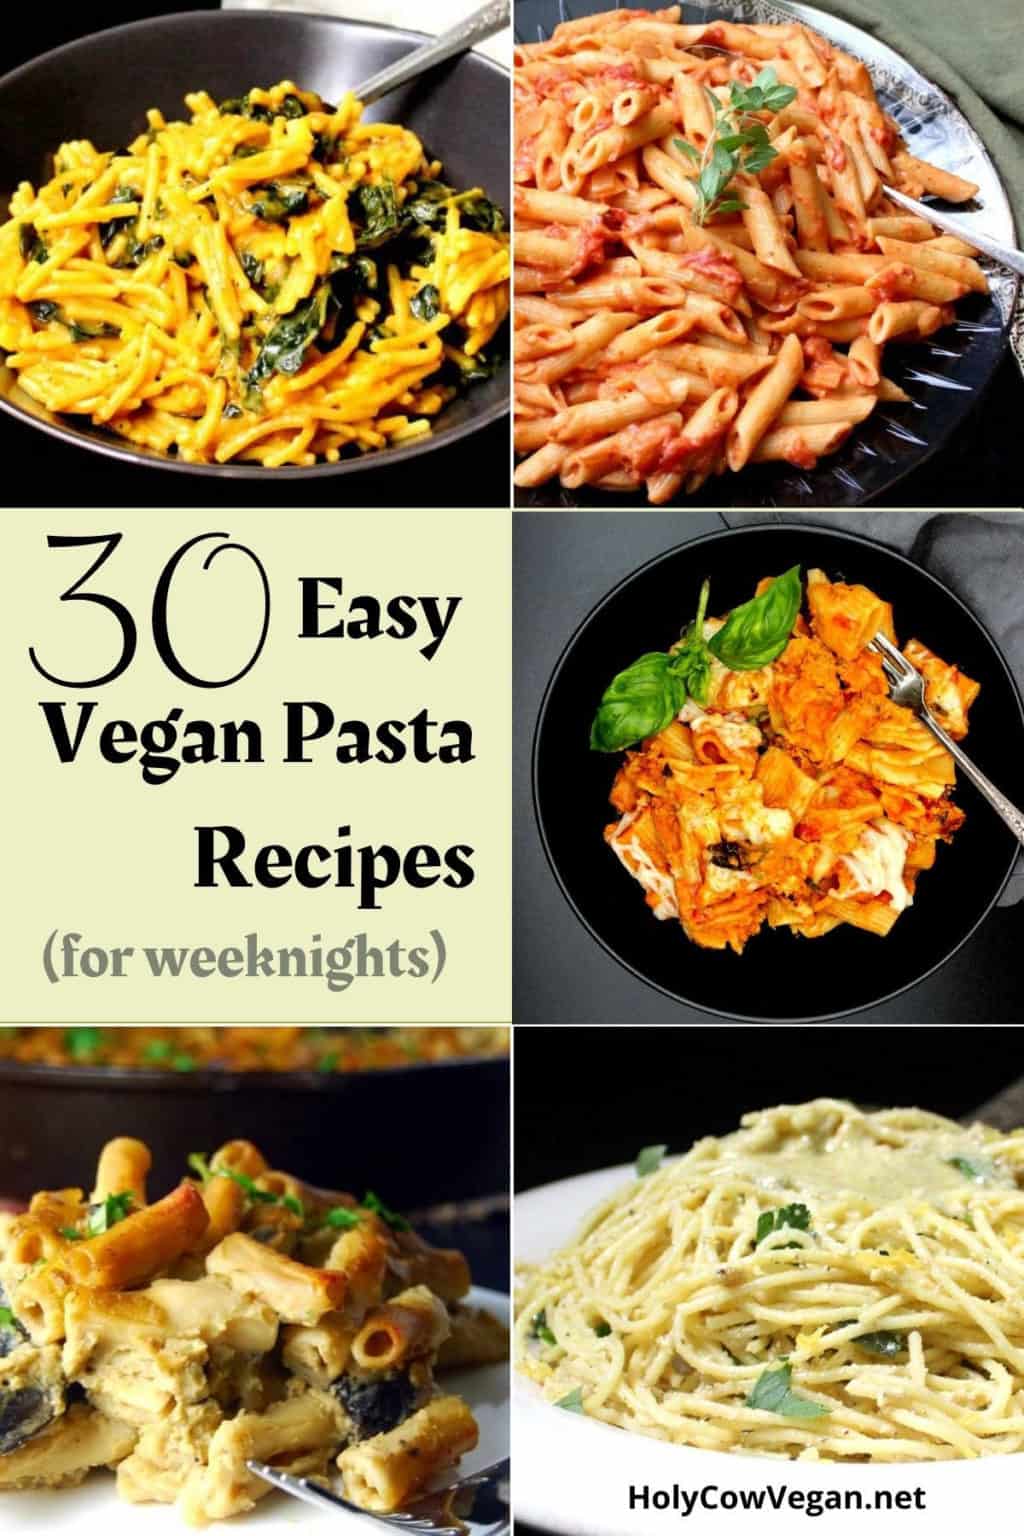 30 Easy Vegan Pasta Recipes for Weeknight Dinners - Holy Cow Vegan